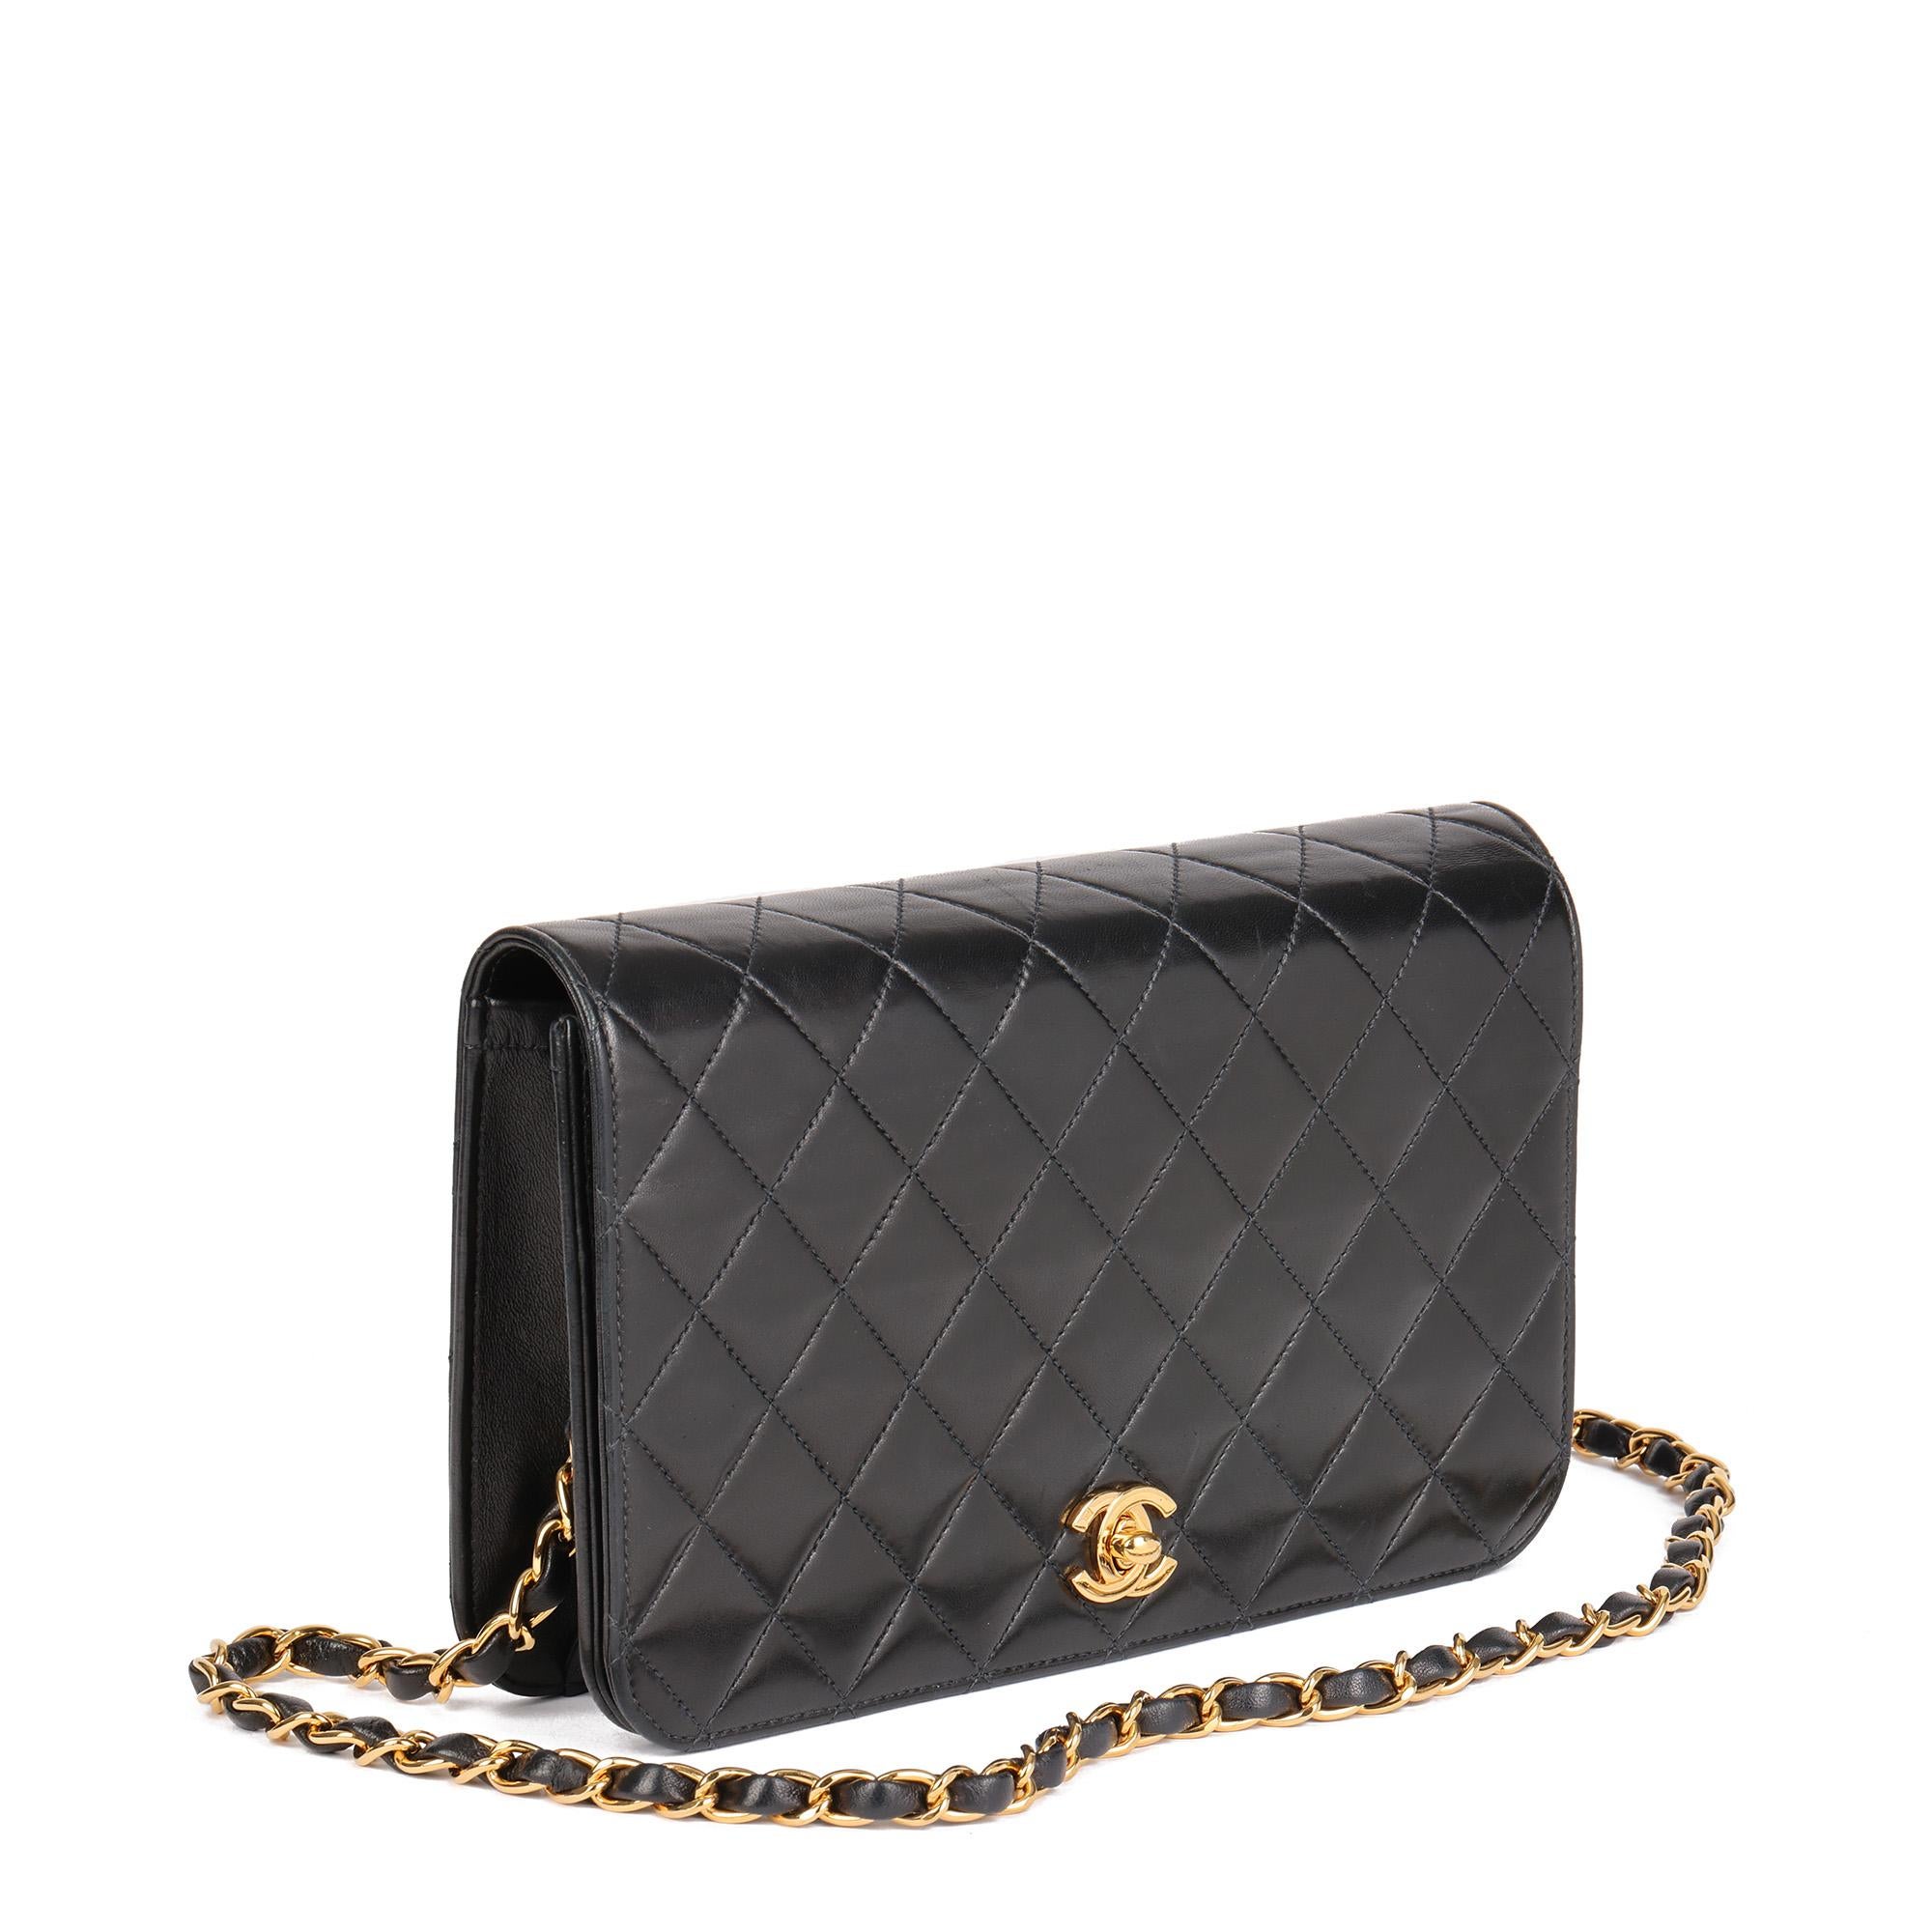 CHANEL
Black Quilted Lambskin Vintage Small Classic Single Full Flap Bag

Xupes Reference: HB4618
Serial Number: 7438256
Age (Circa): 2002
Accompanied By: Authenticity Card
Authenticity Details: Authenticity Card, Serial Sticker (Made in